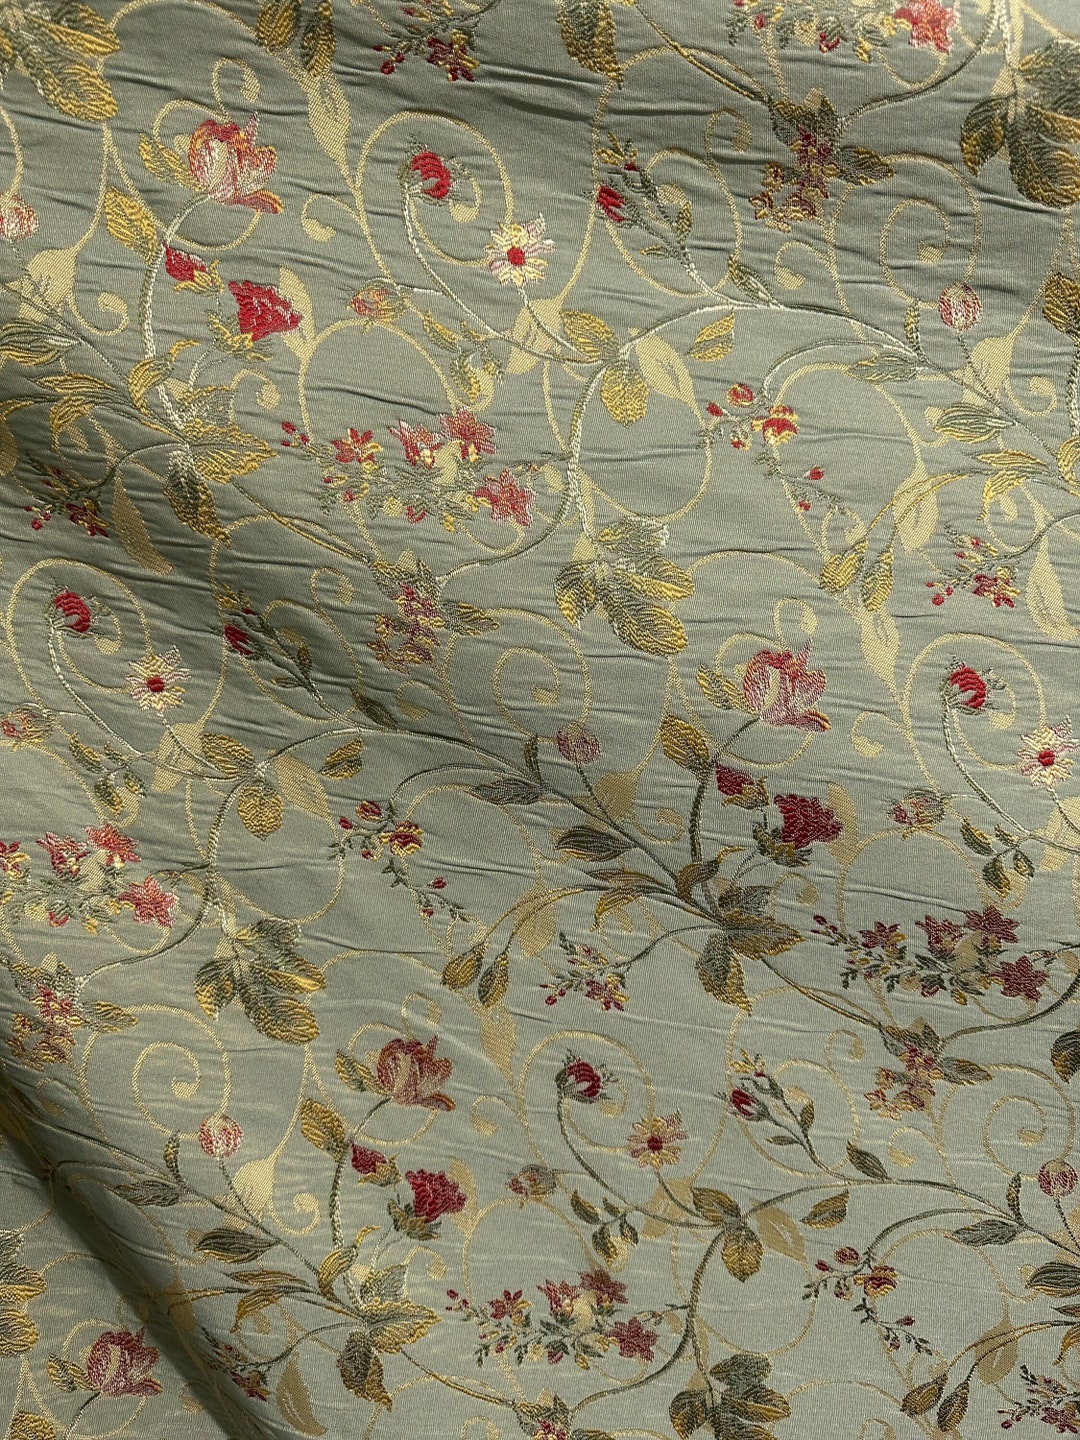 SAGE GREEN GOLD Multicolor Floral Upholstery Drapery Brocade Fabric 110 ...